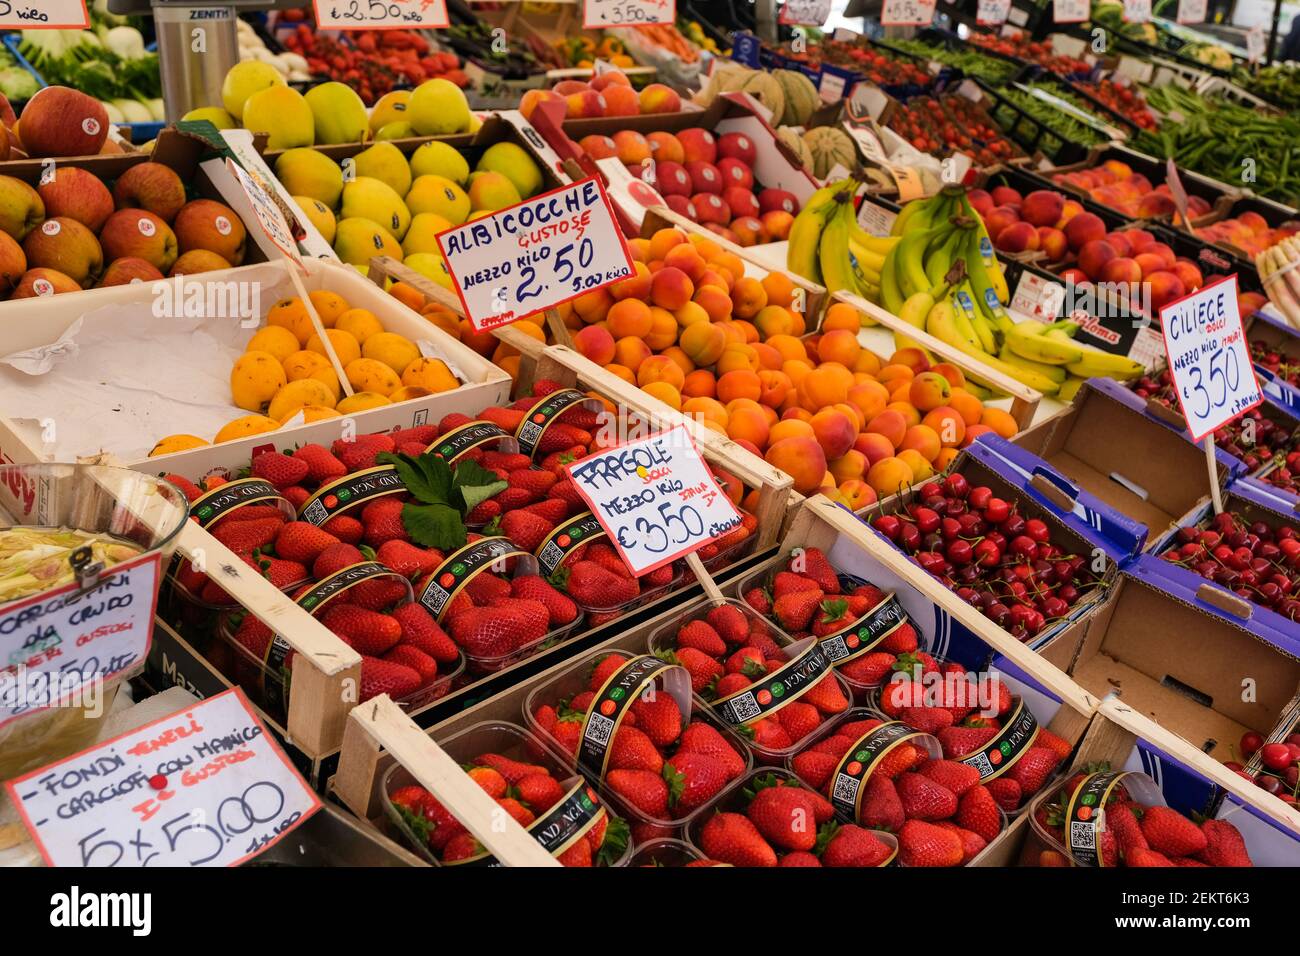 Fruit and vegetables on display at the market in Piazza della Frutta in Padua Italy Stock Photo